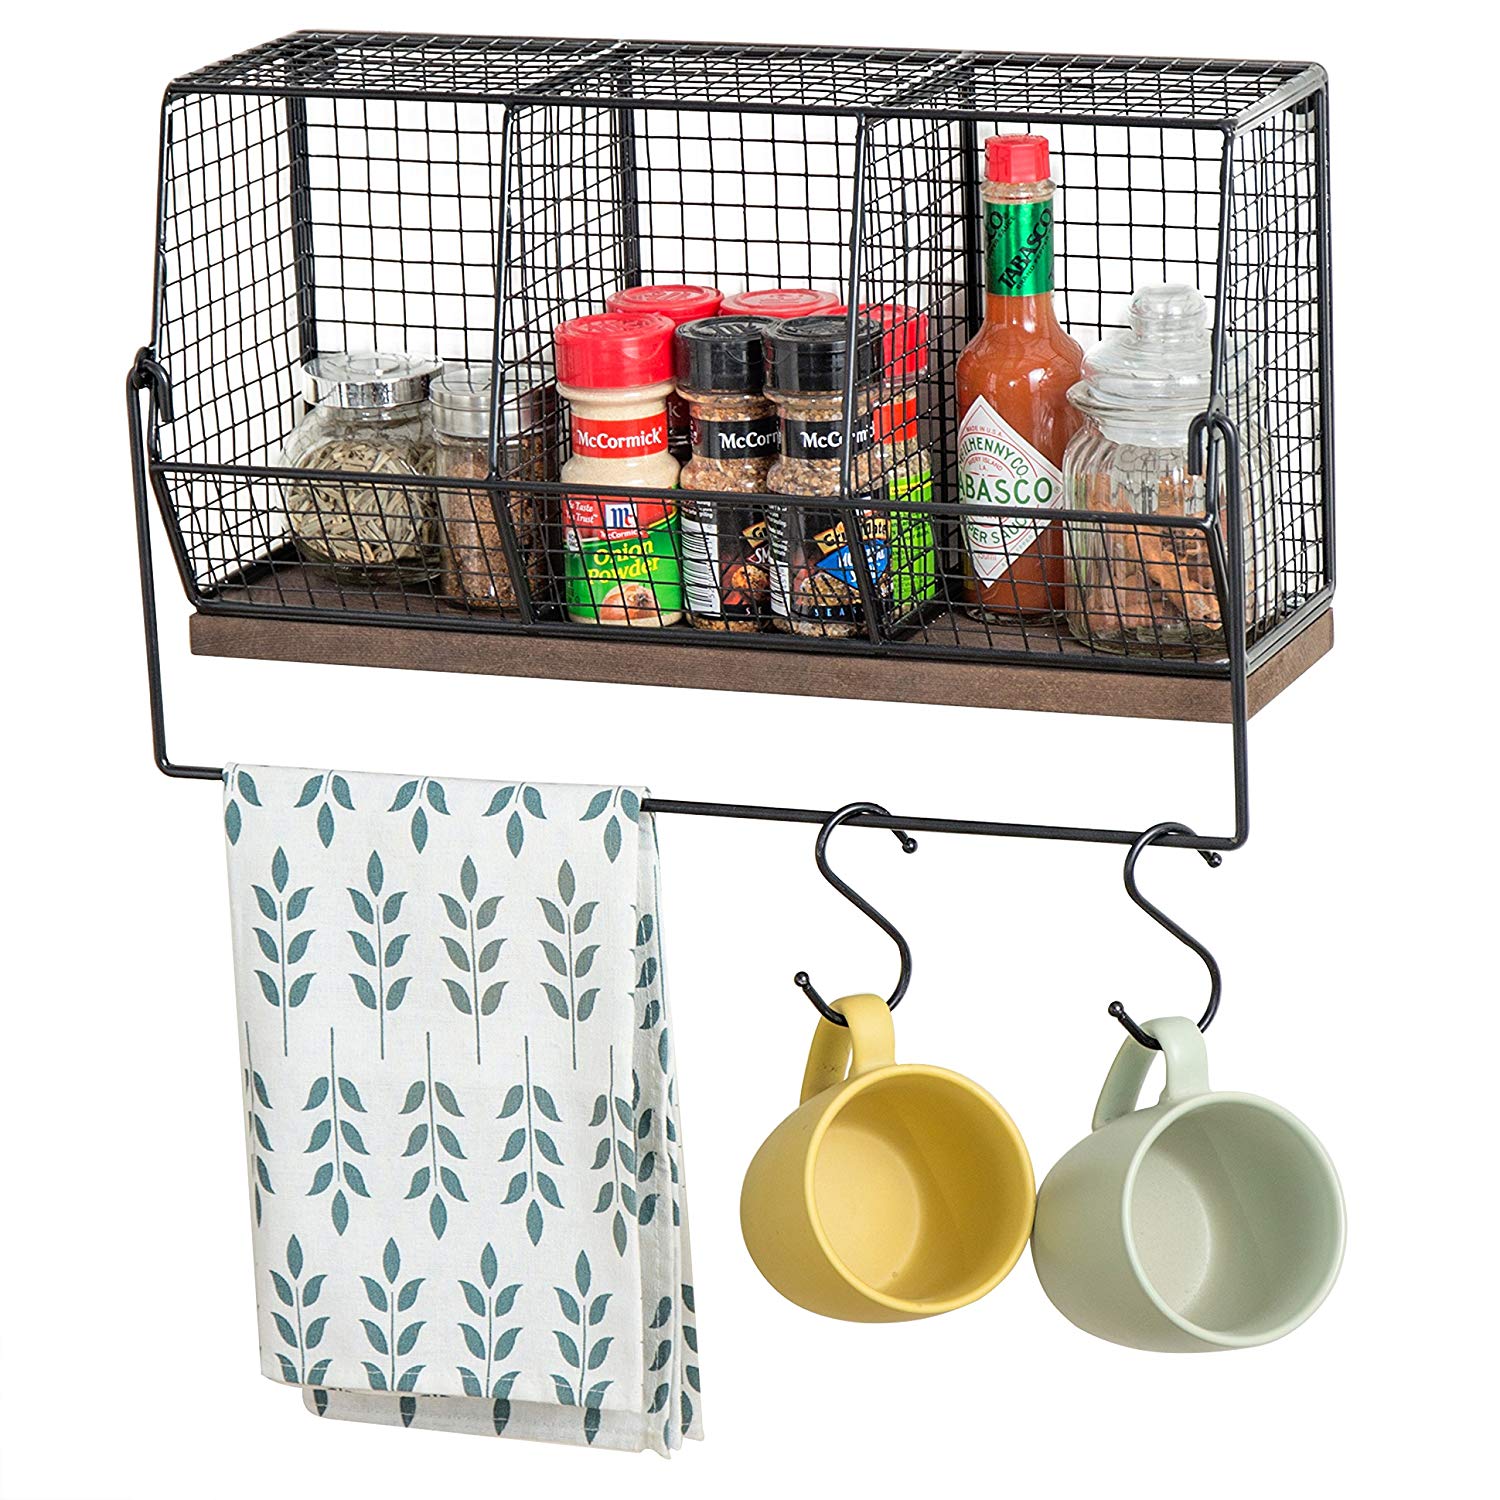 MyGift Chicken Wire Wall-Mounted Spice Rack with Towel Bar & 4 S-Hooks